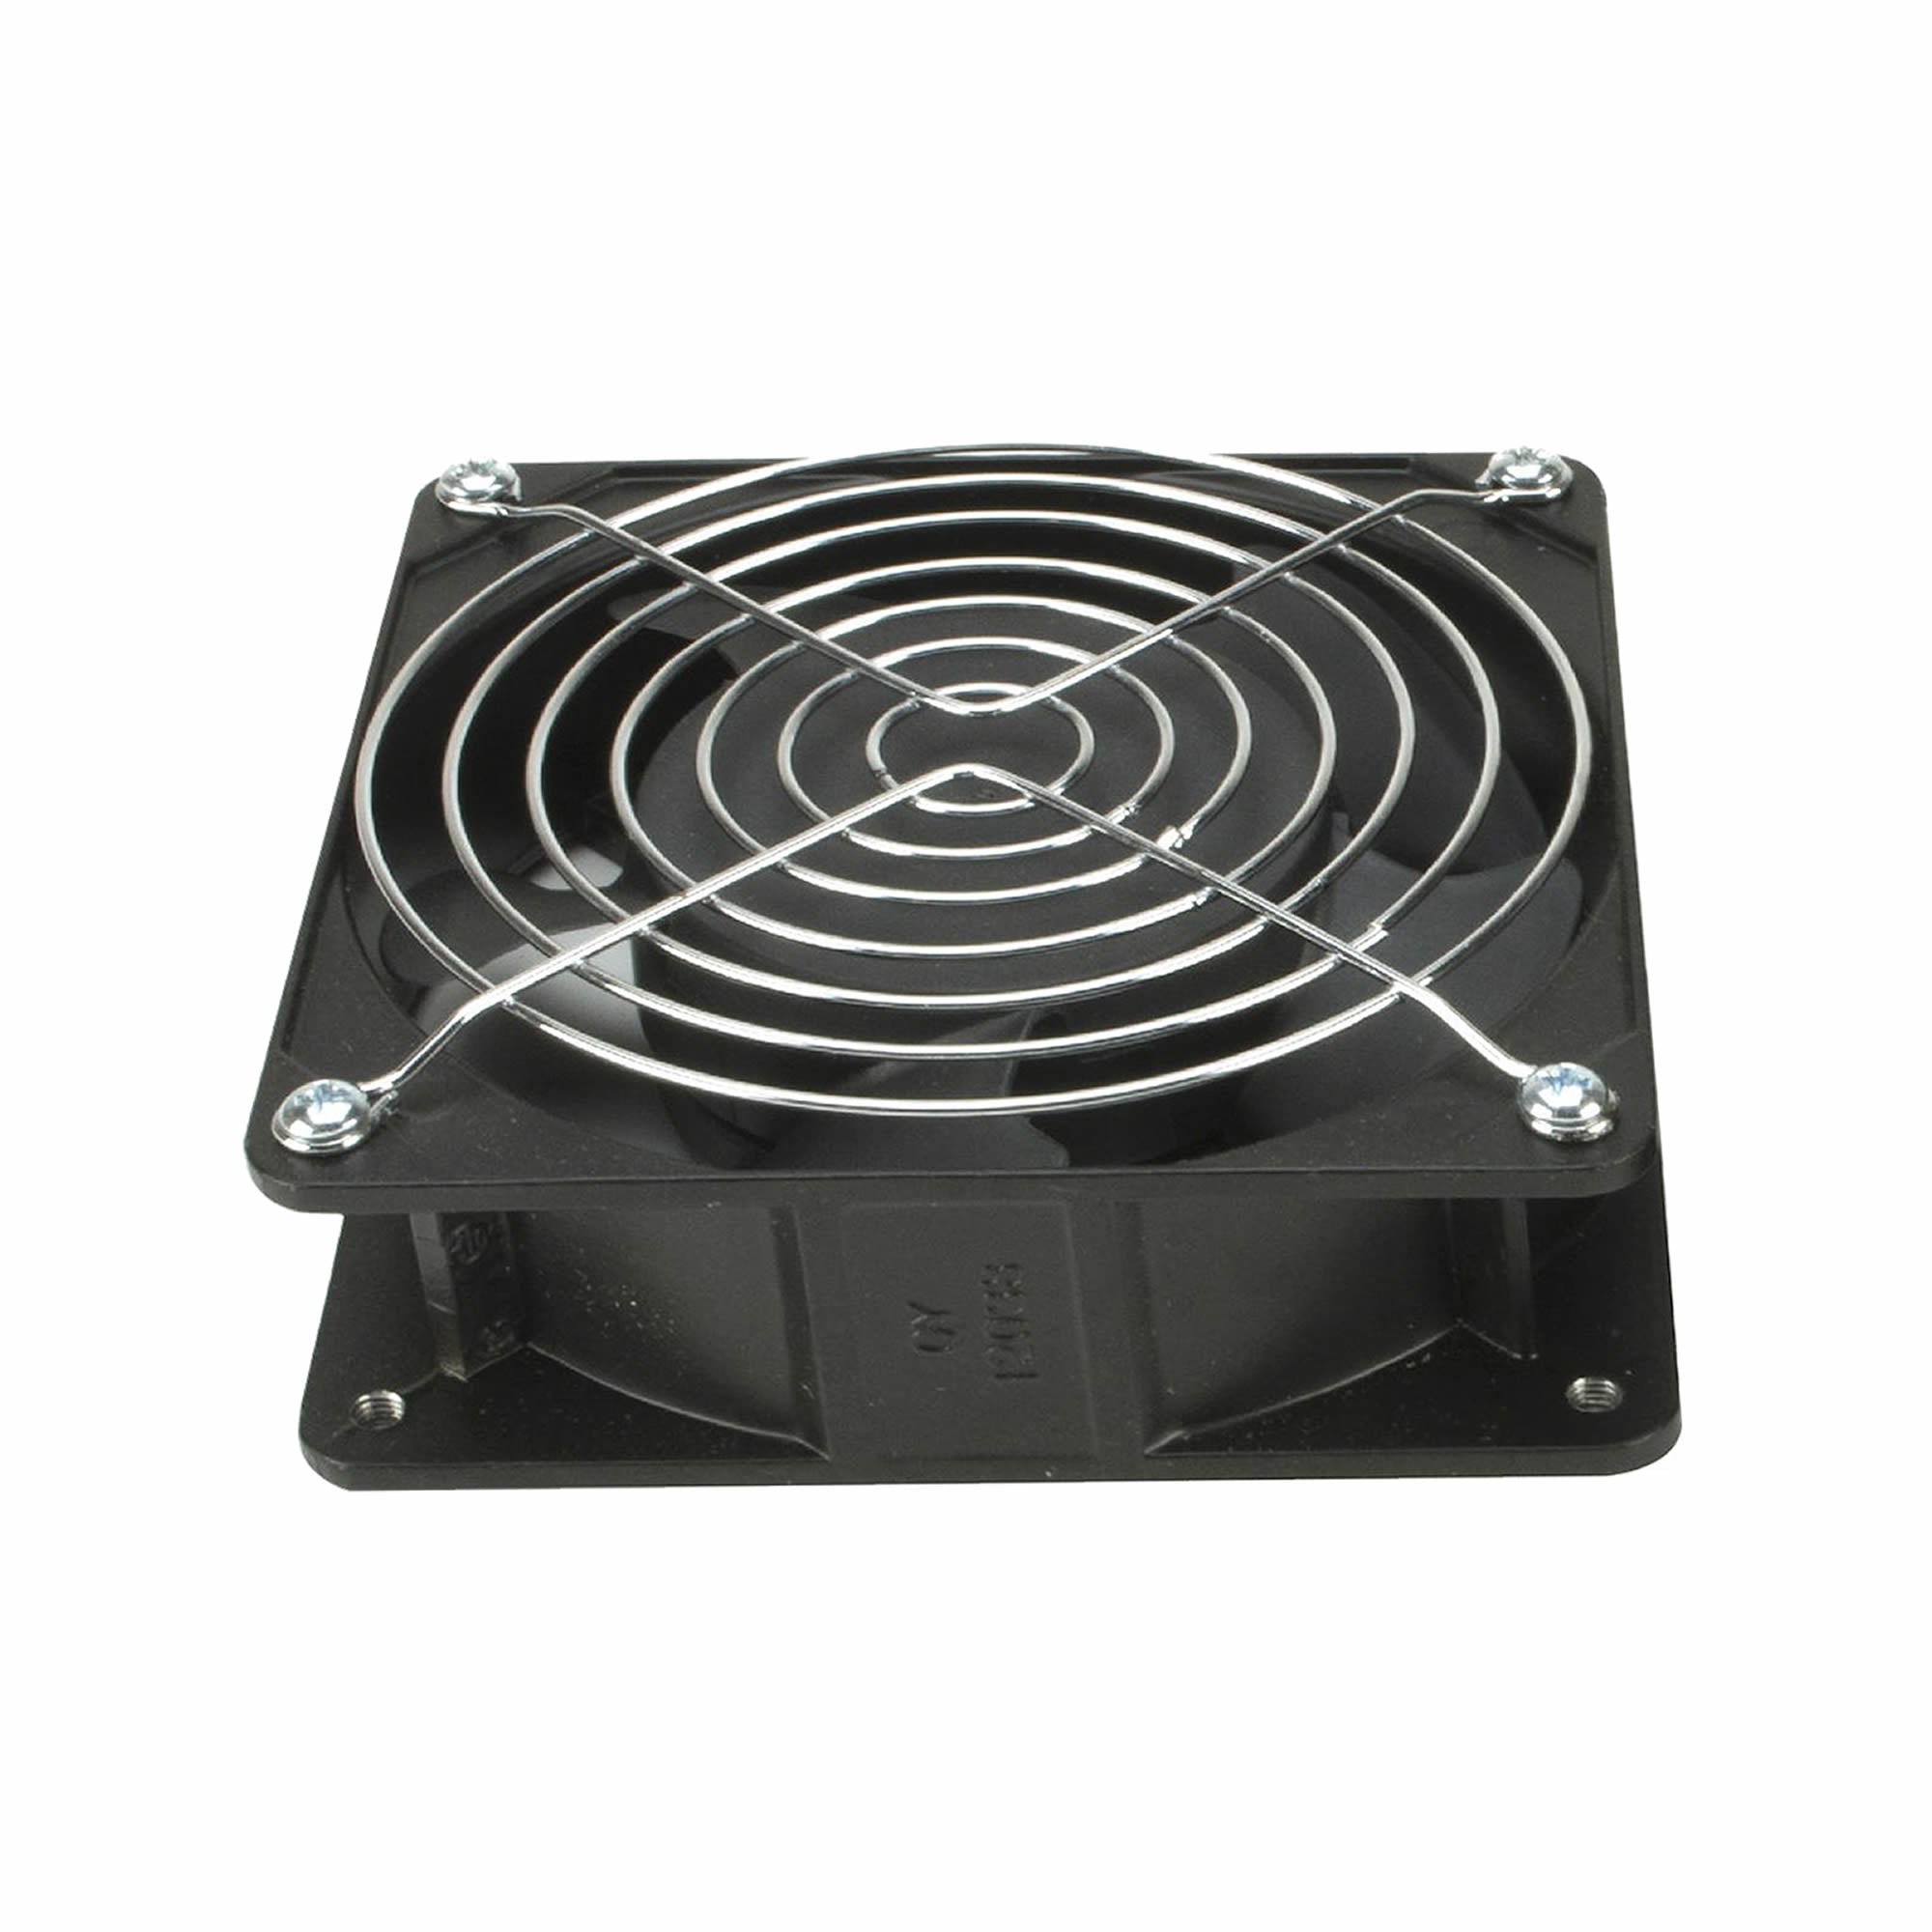 07-6320-04 AC Cooling Fan for Network Cabinet